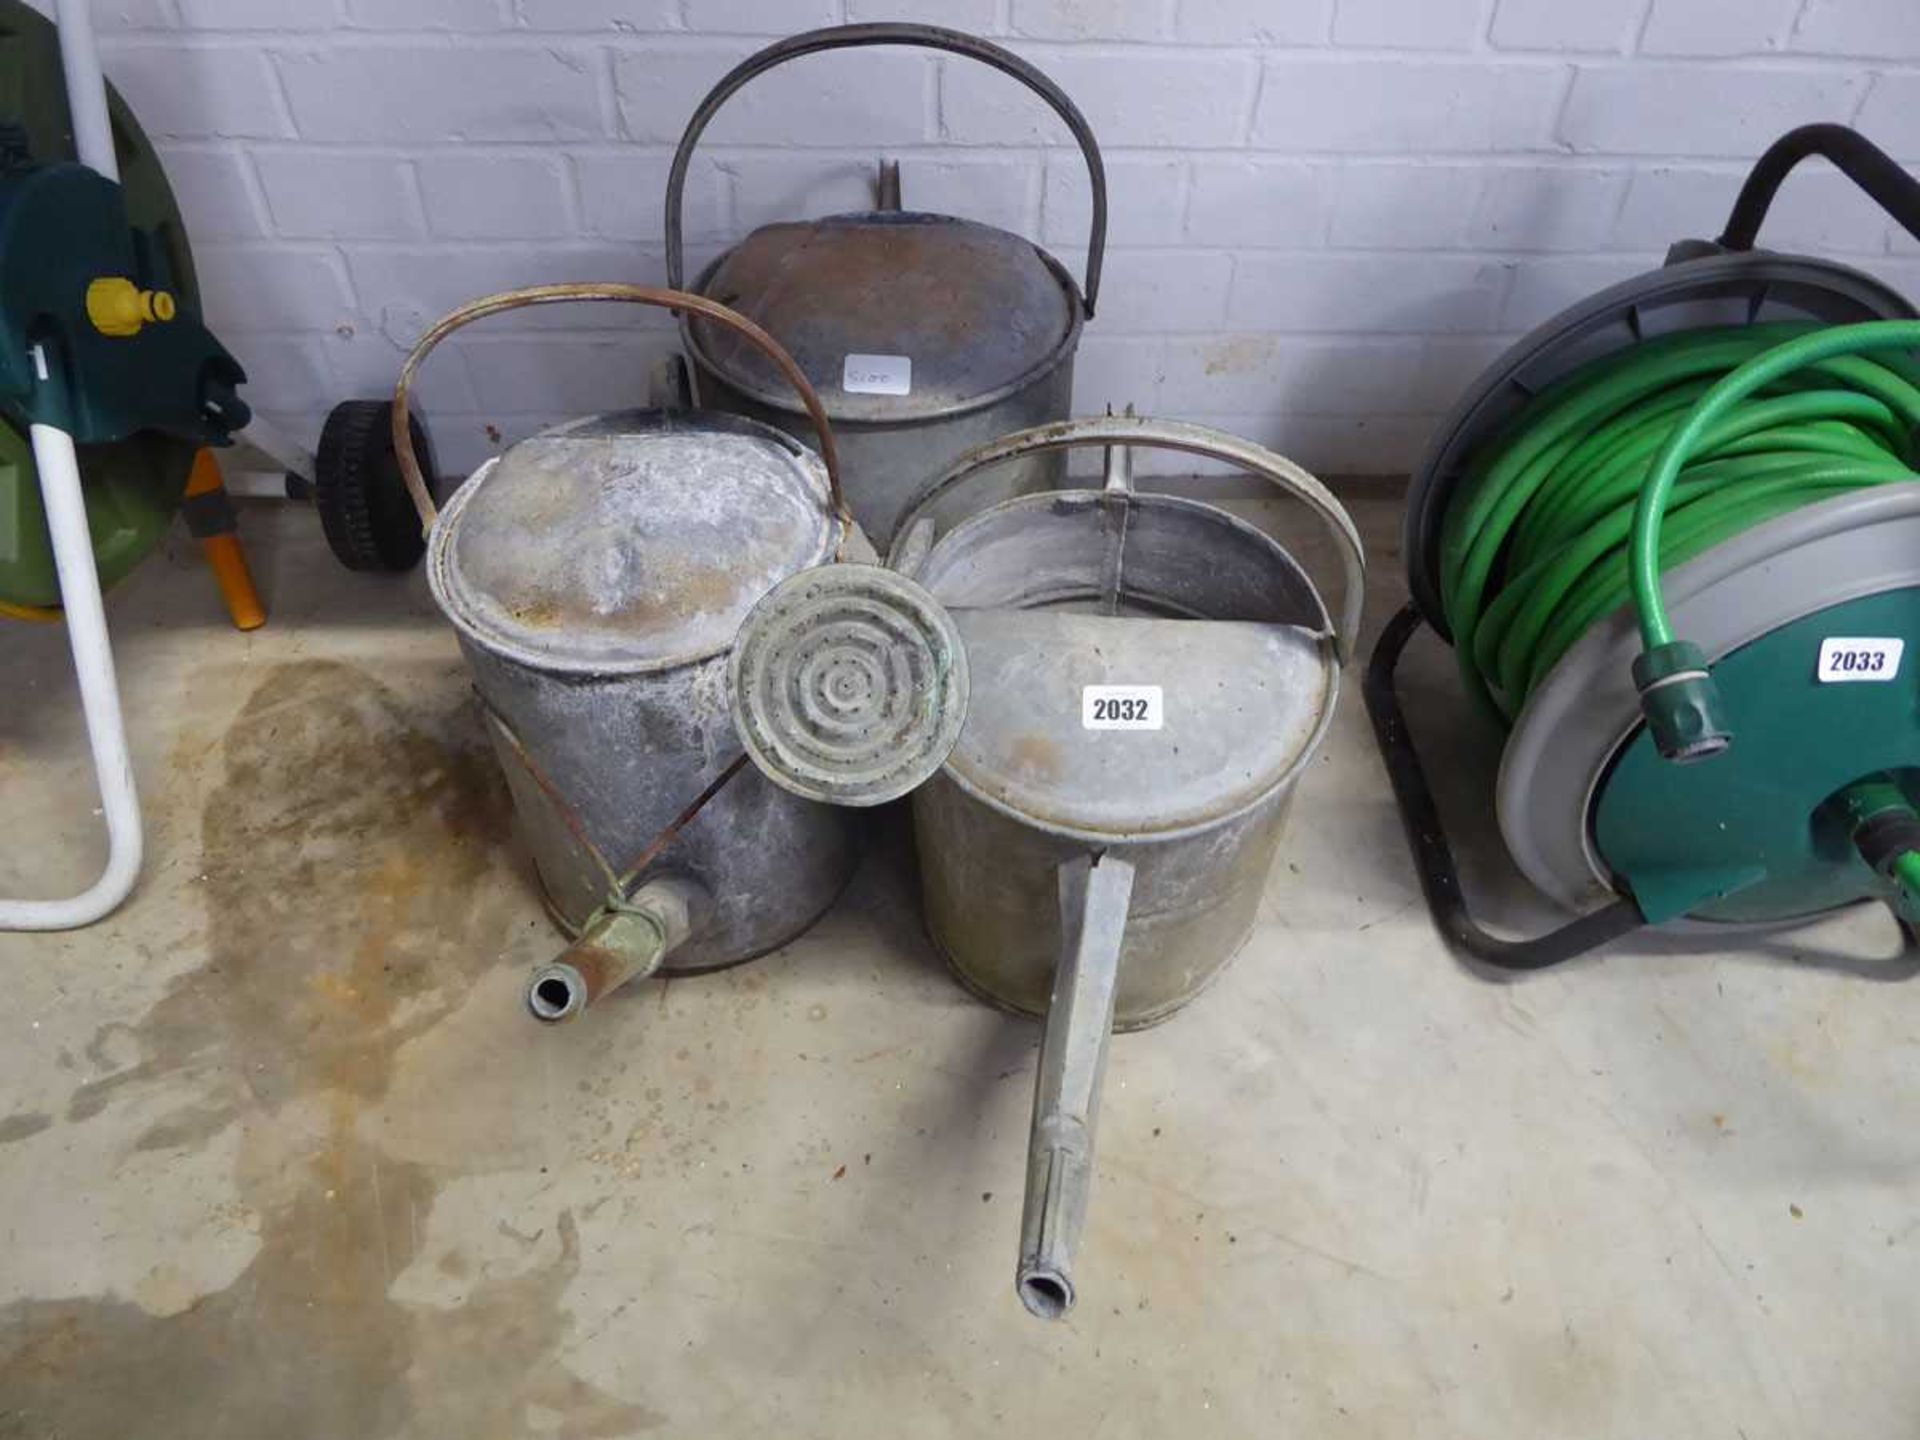 3 galvanised watering cans